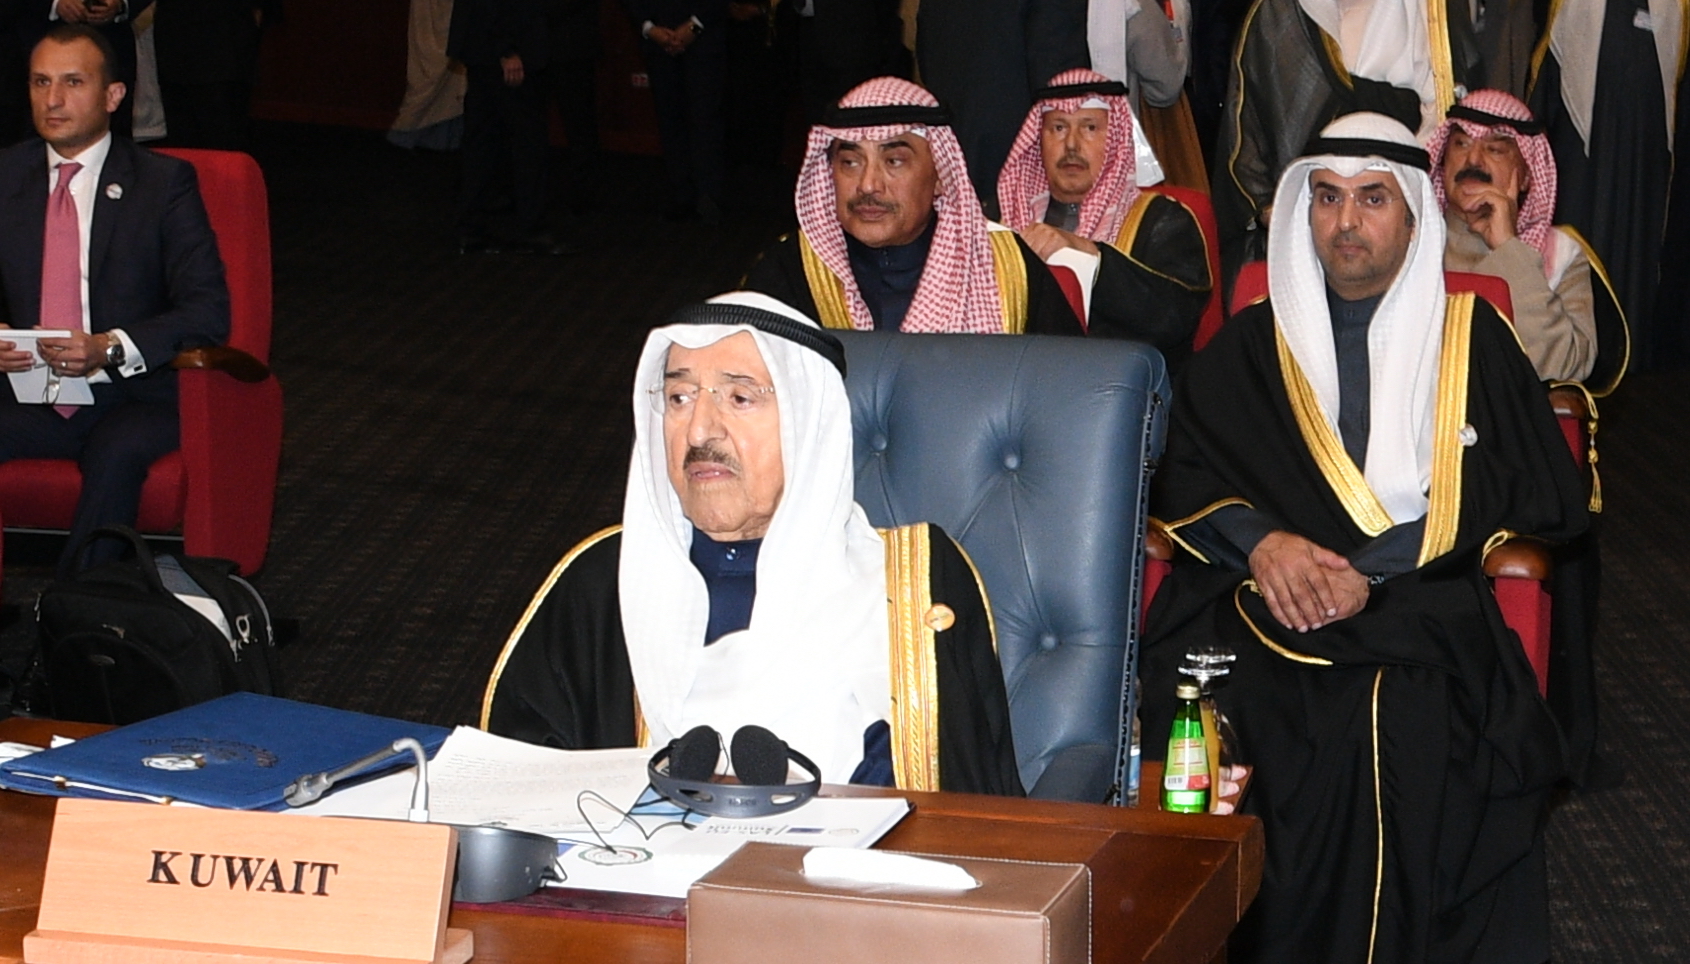 H.H the Amir of Kuwait in First European Union and Arab League summit